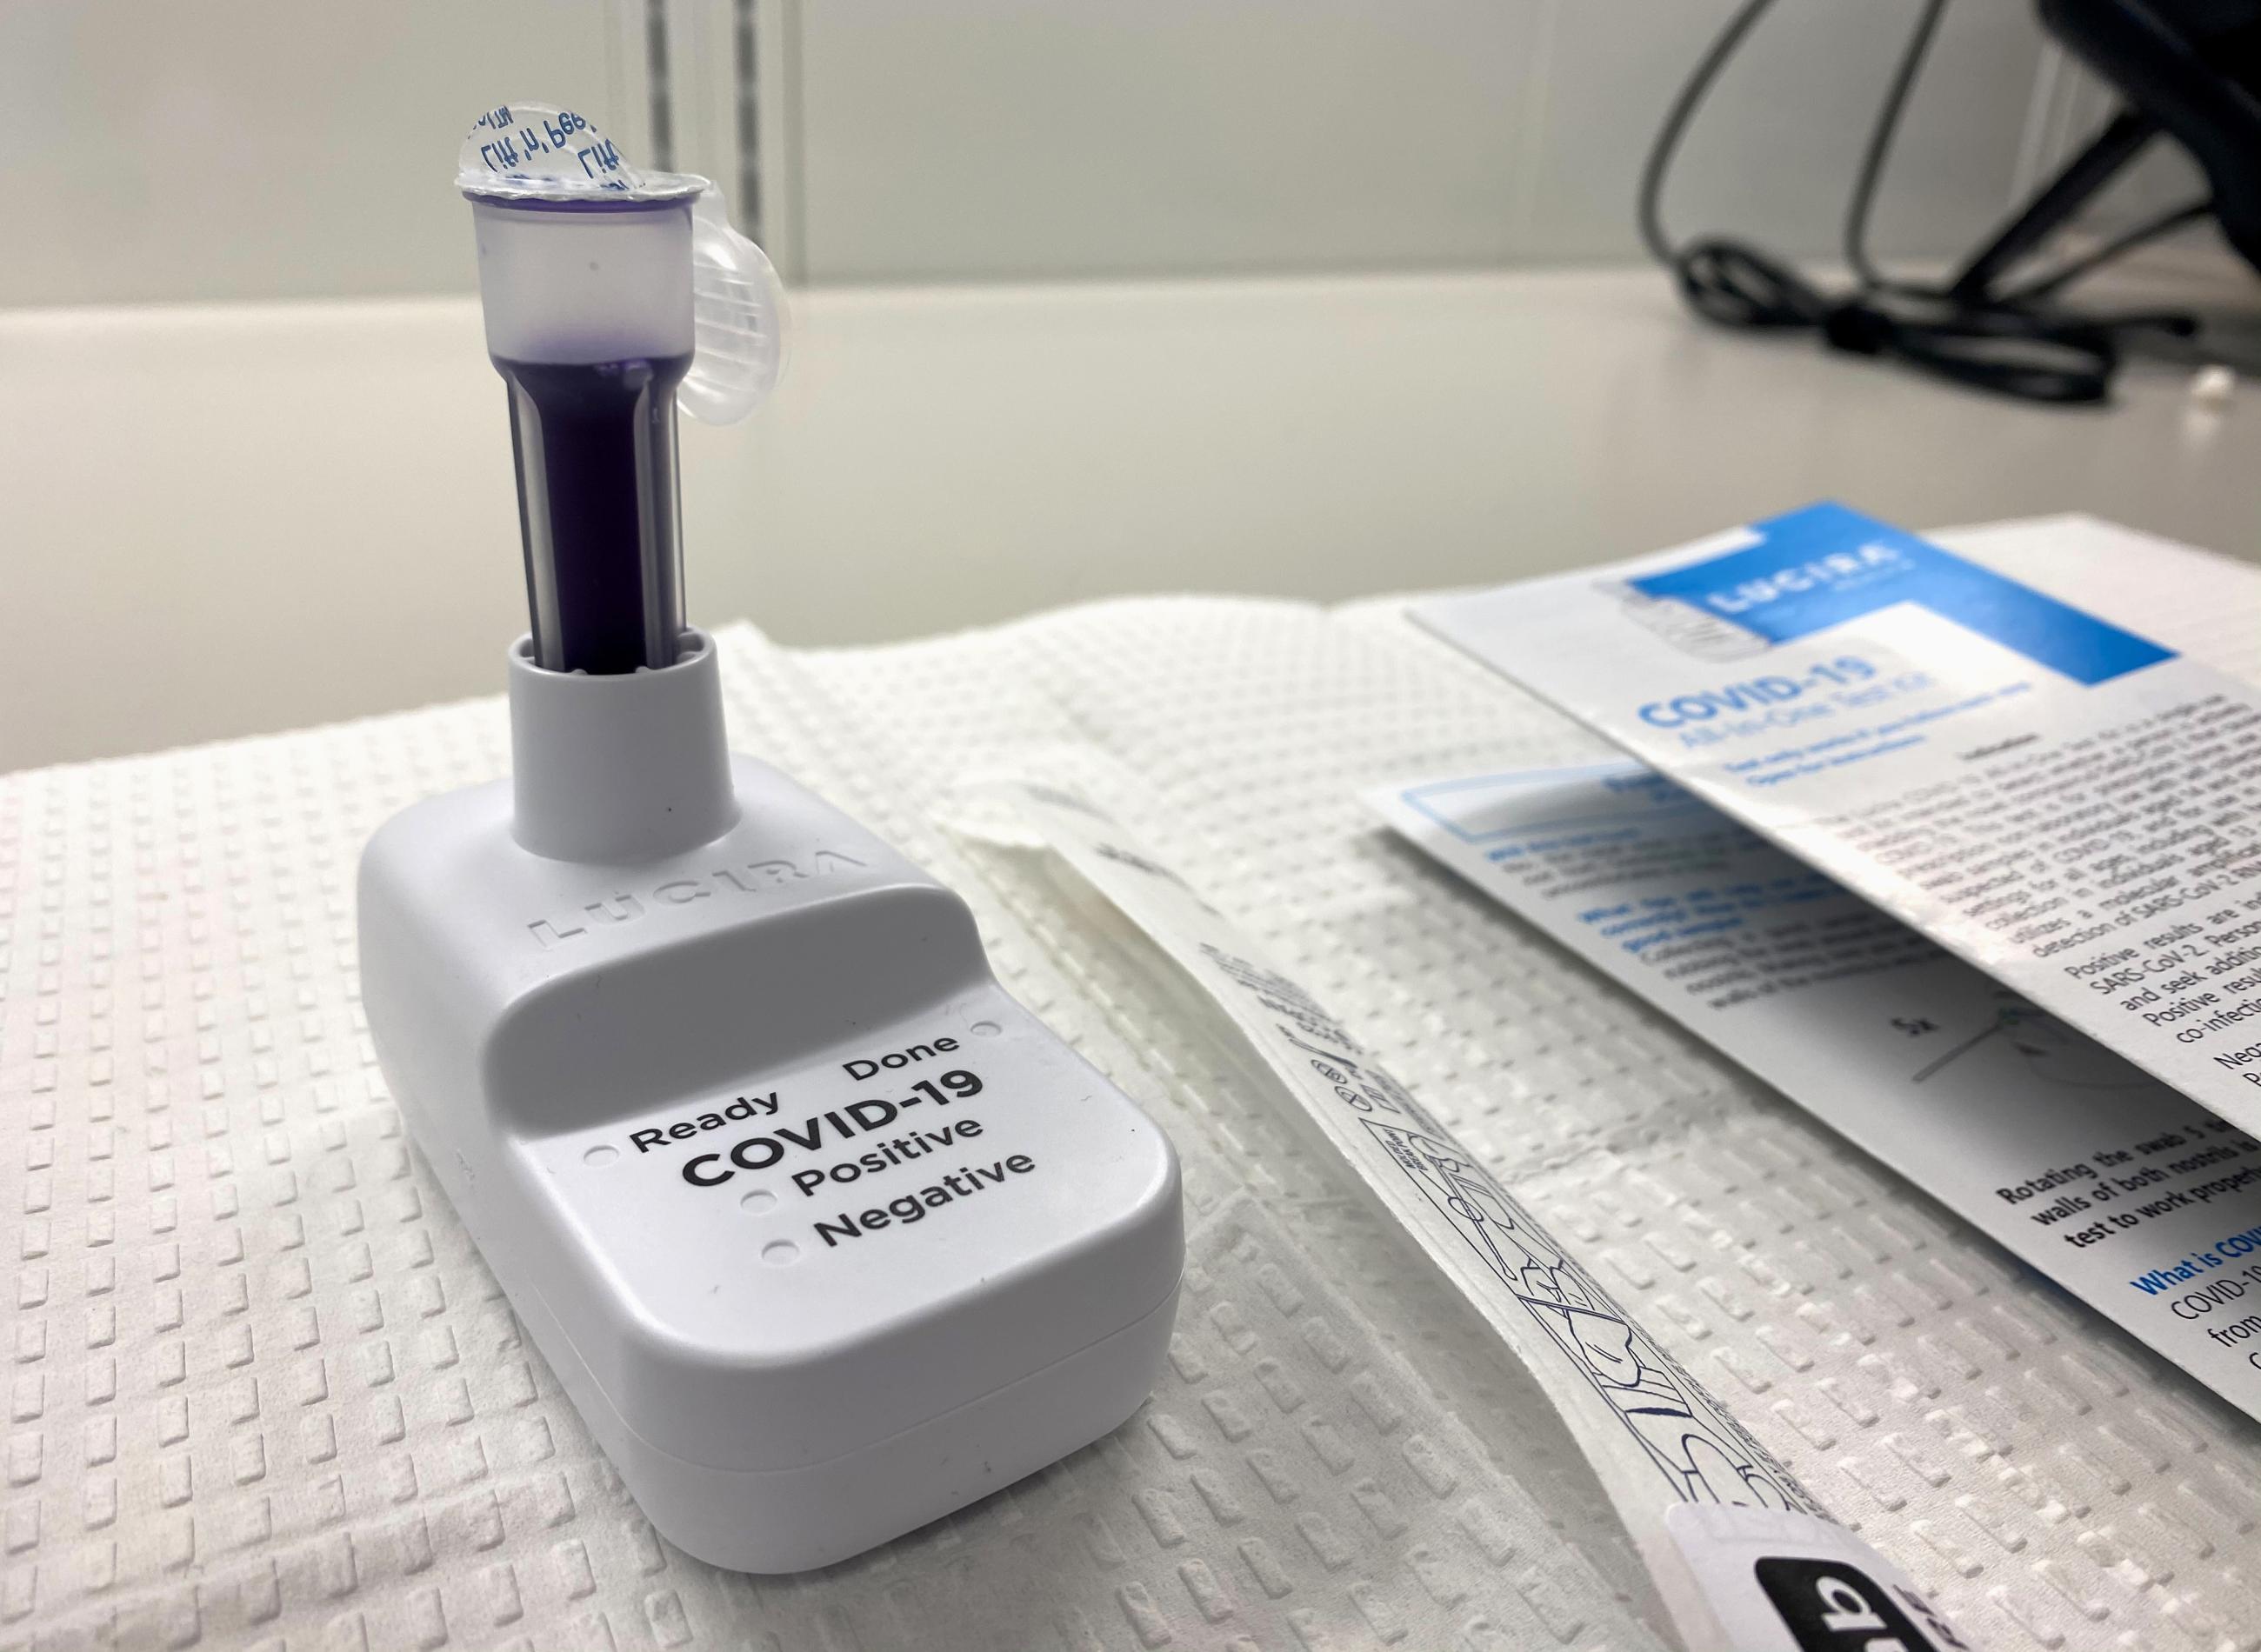 A COVID-19 at-home test kit that was approved by the U.S. Food and Drug Administration for emergency use authorization is seen.